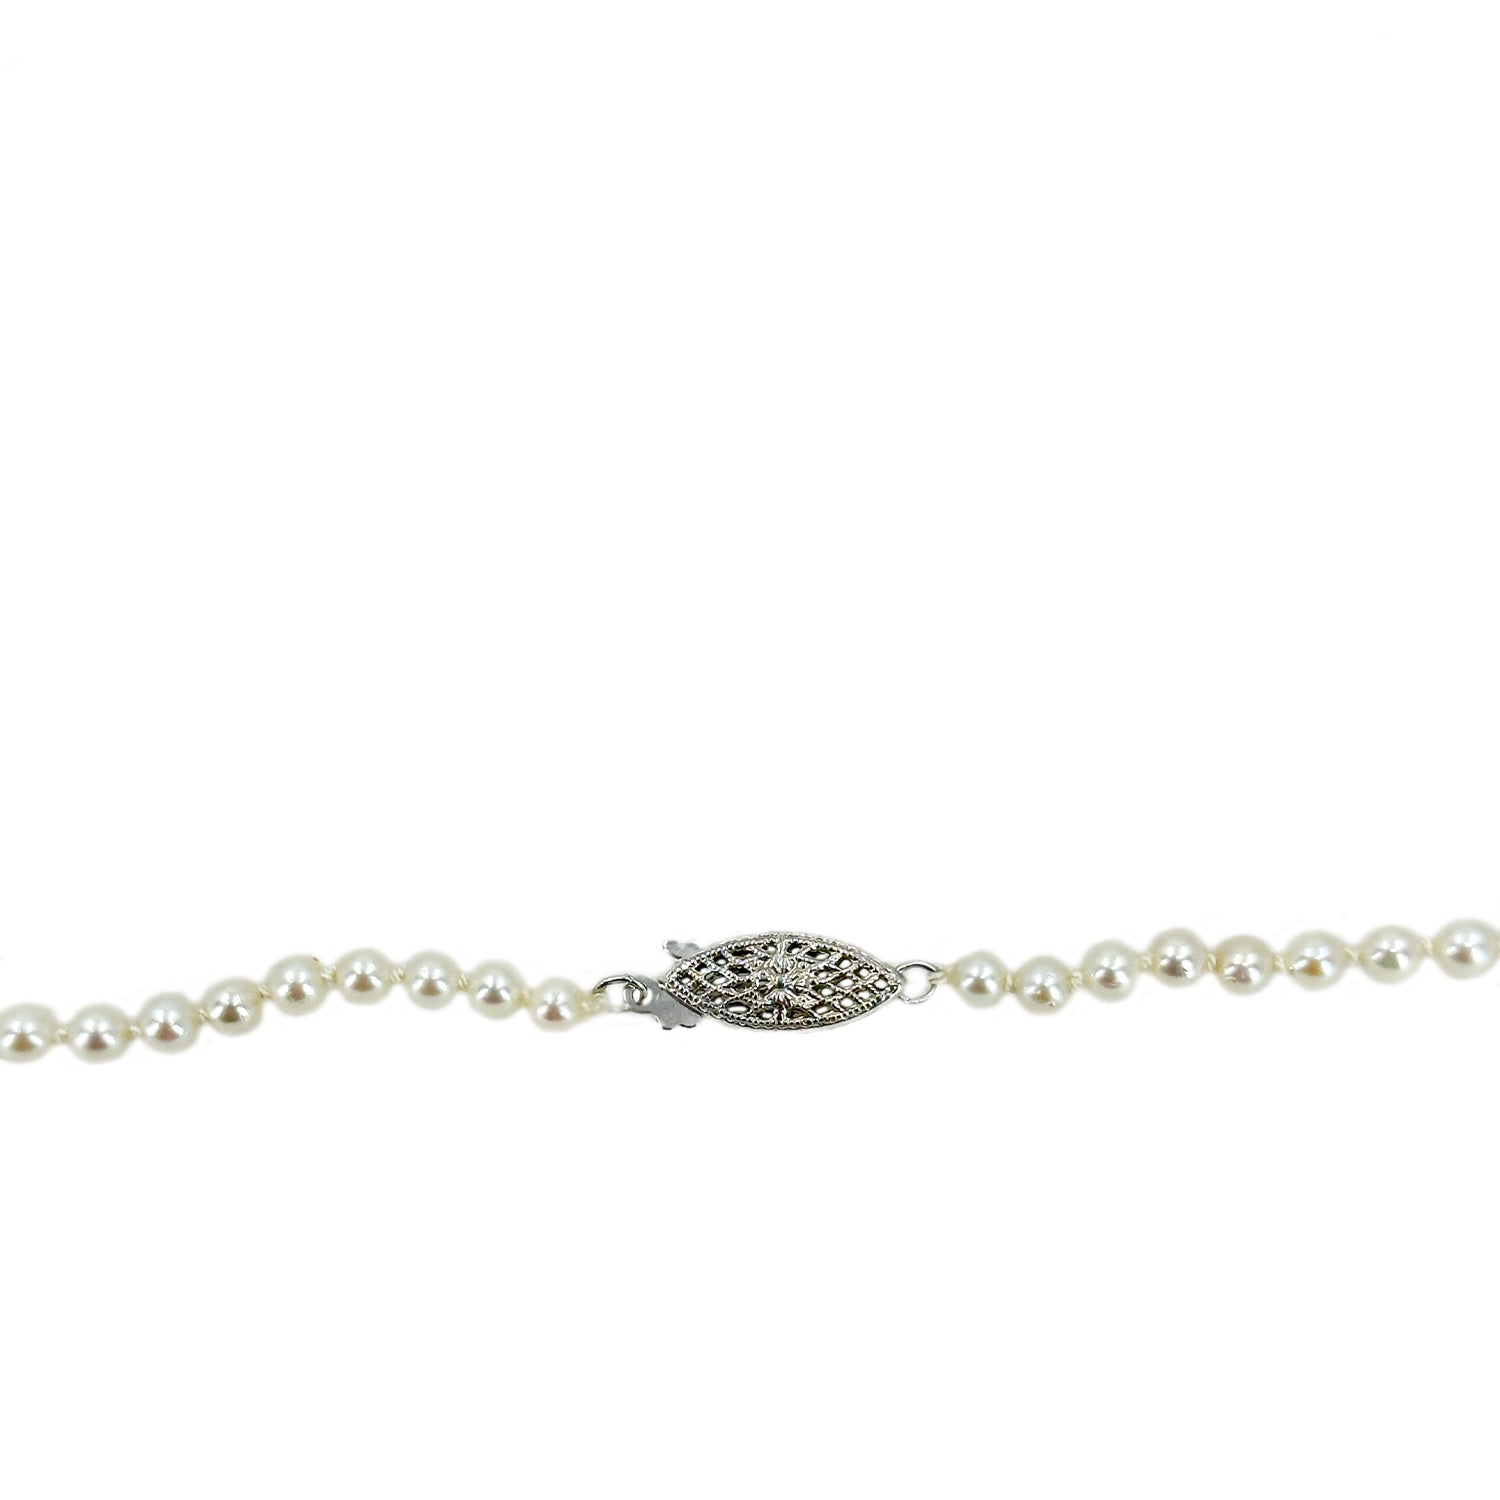 Graduated Mid-Century Japanese Saltwater Cultured Akoya Pearl Vintage Necklace Strand - 14K White Gold 20.25 Inch